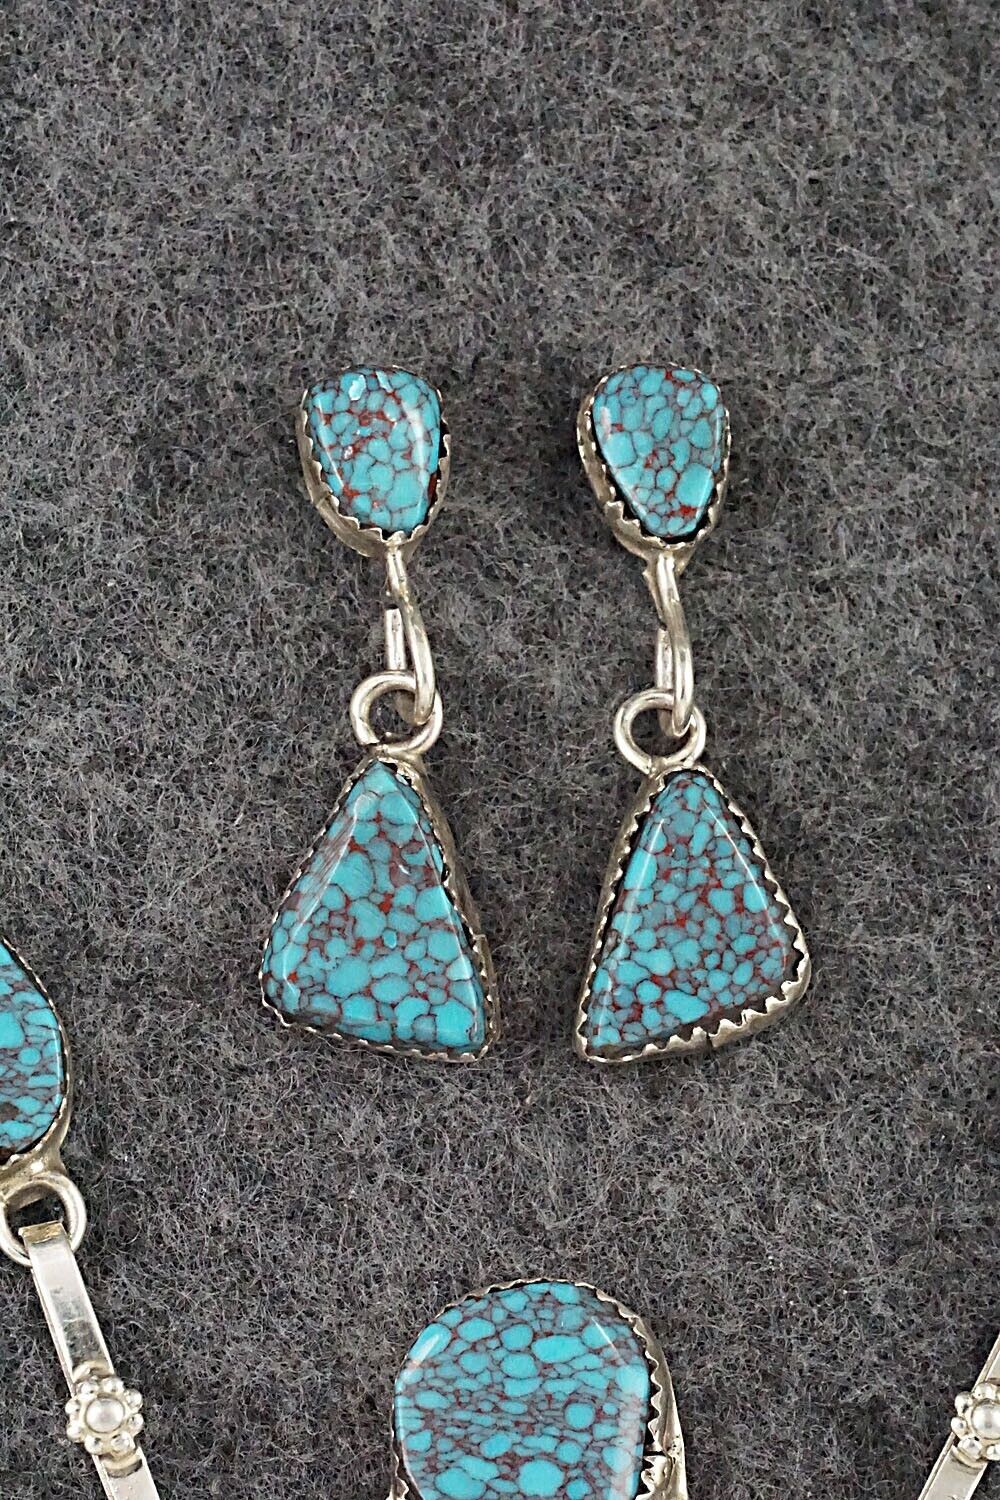 Turquoise & Sterling Silver Necklace and Earrings Set - Vangie Tsabetsaye